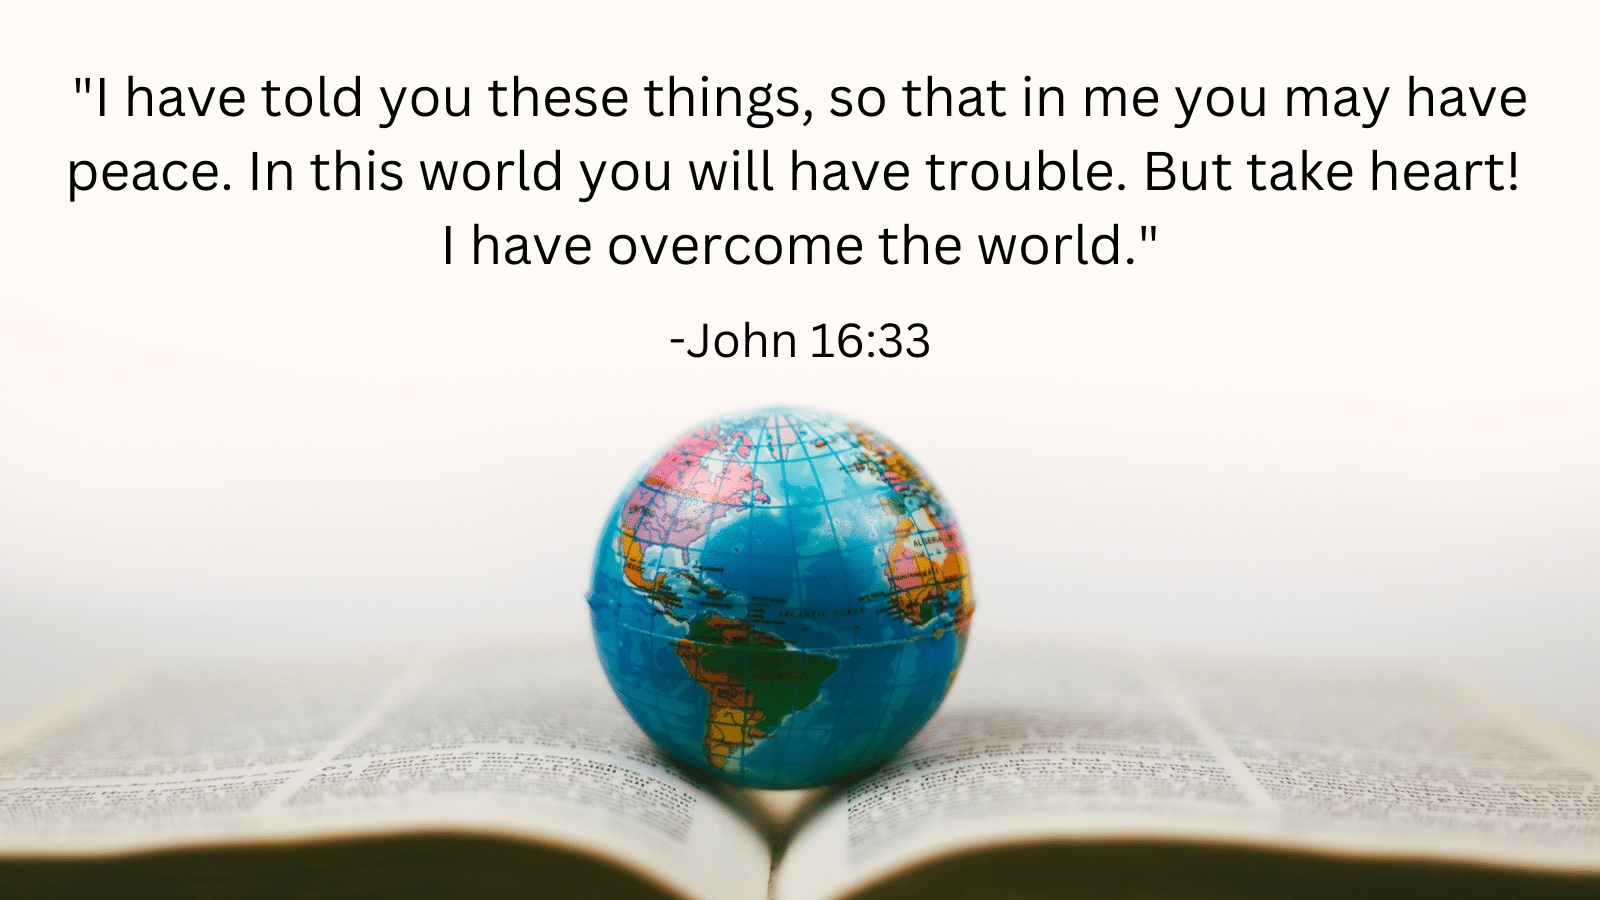 Bible with small globe on top with John 16:33